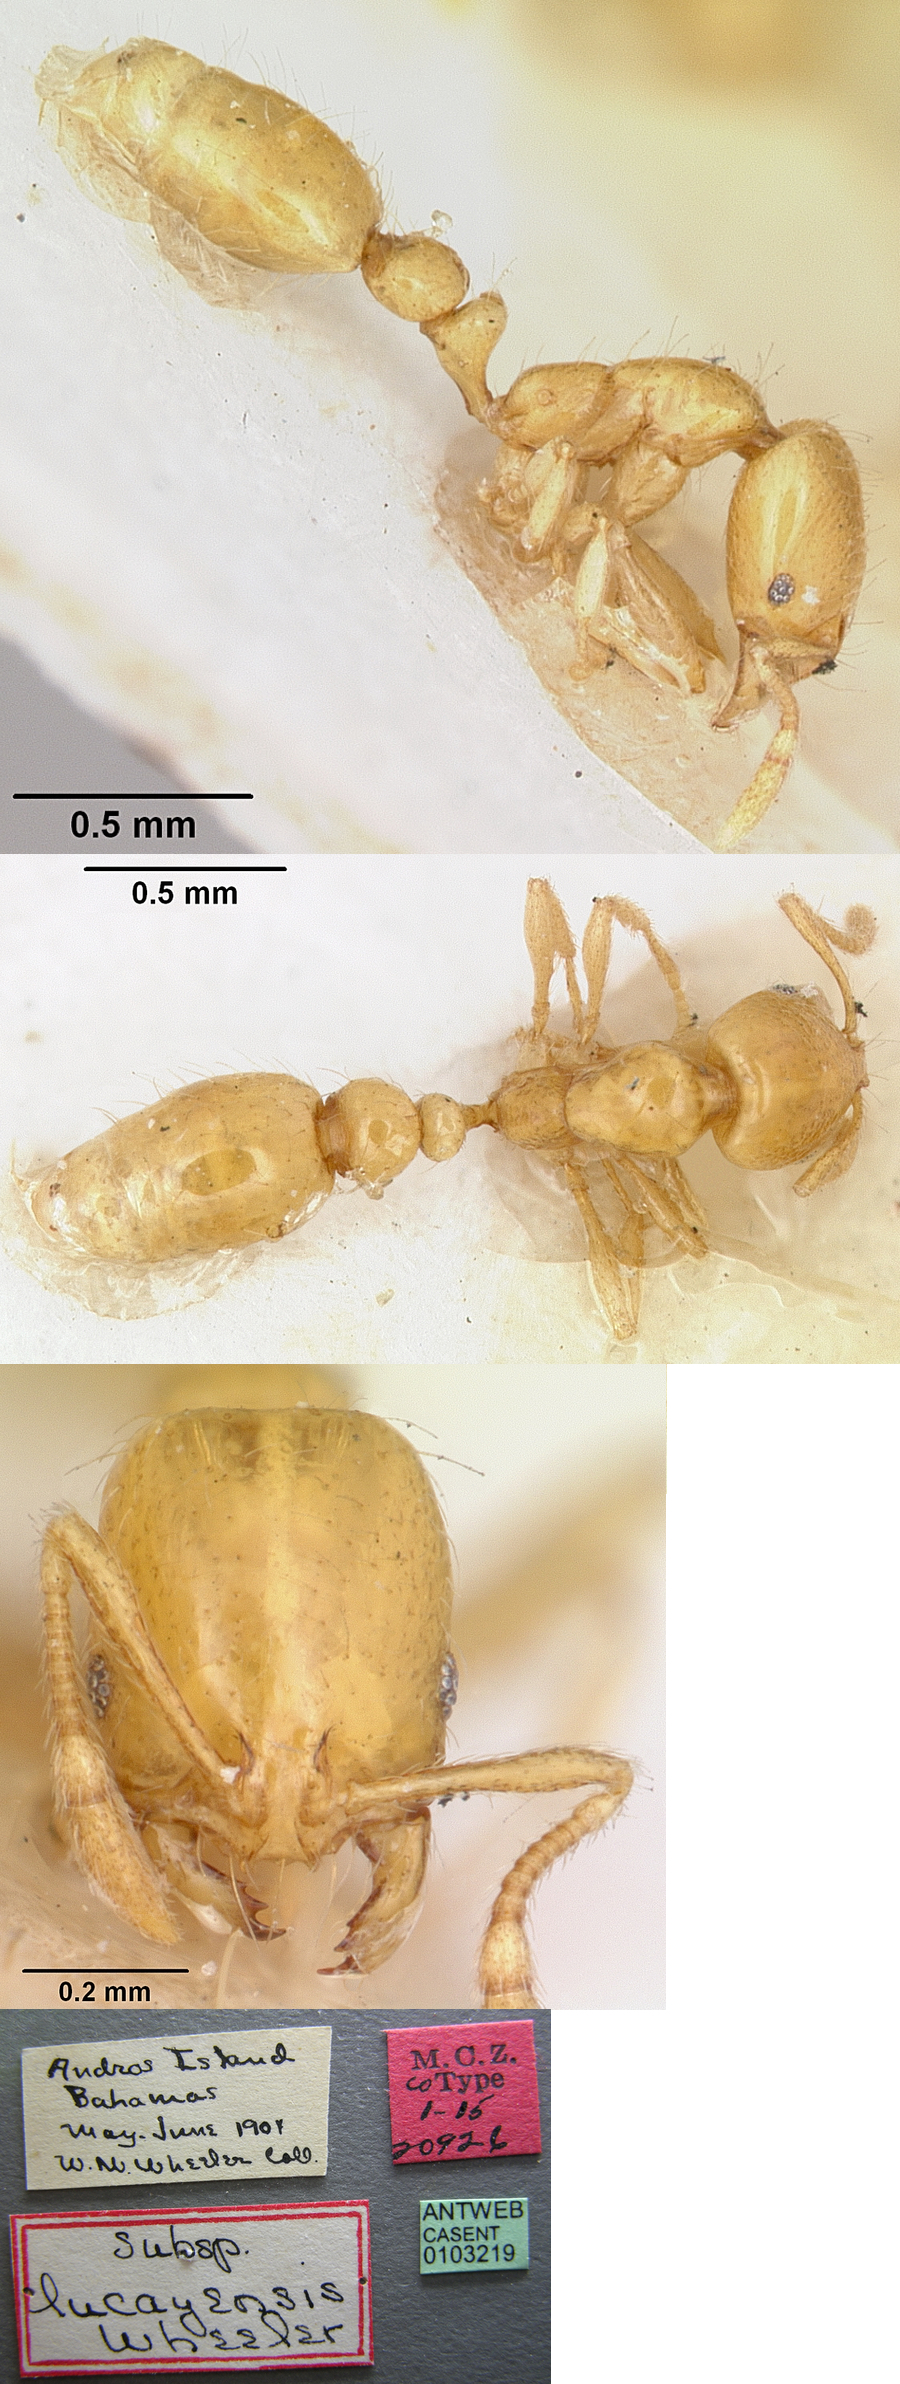 Solenopsis lucayensis